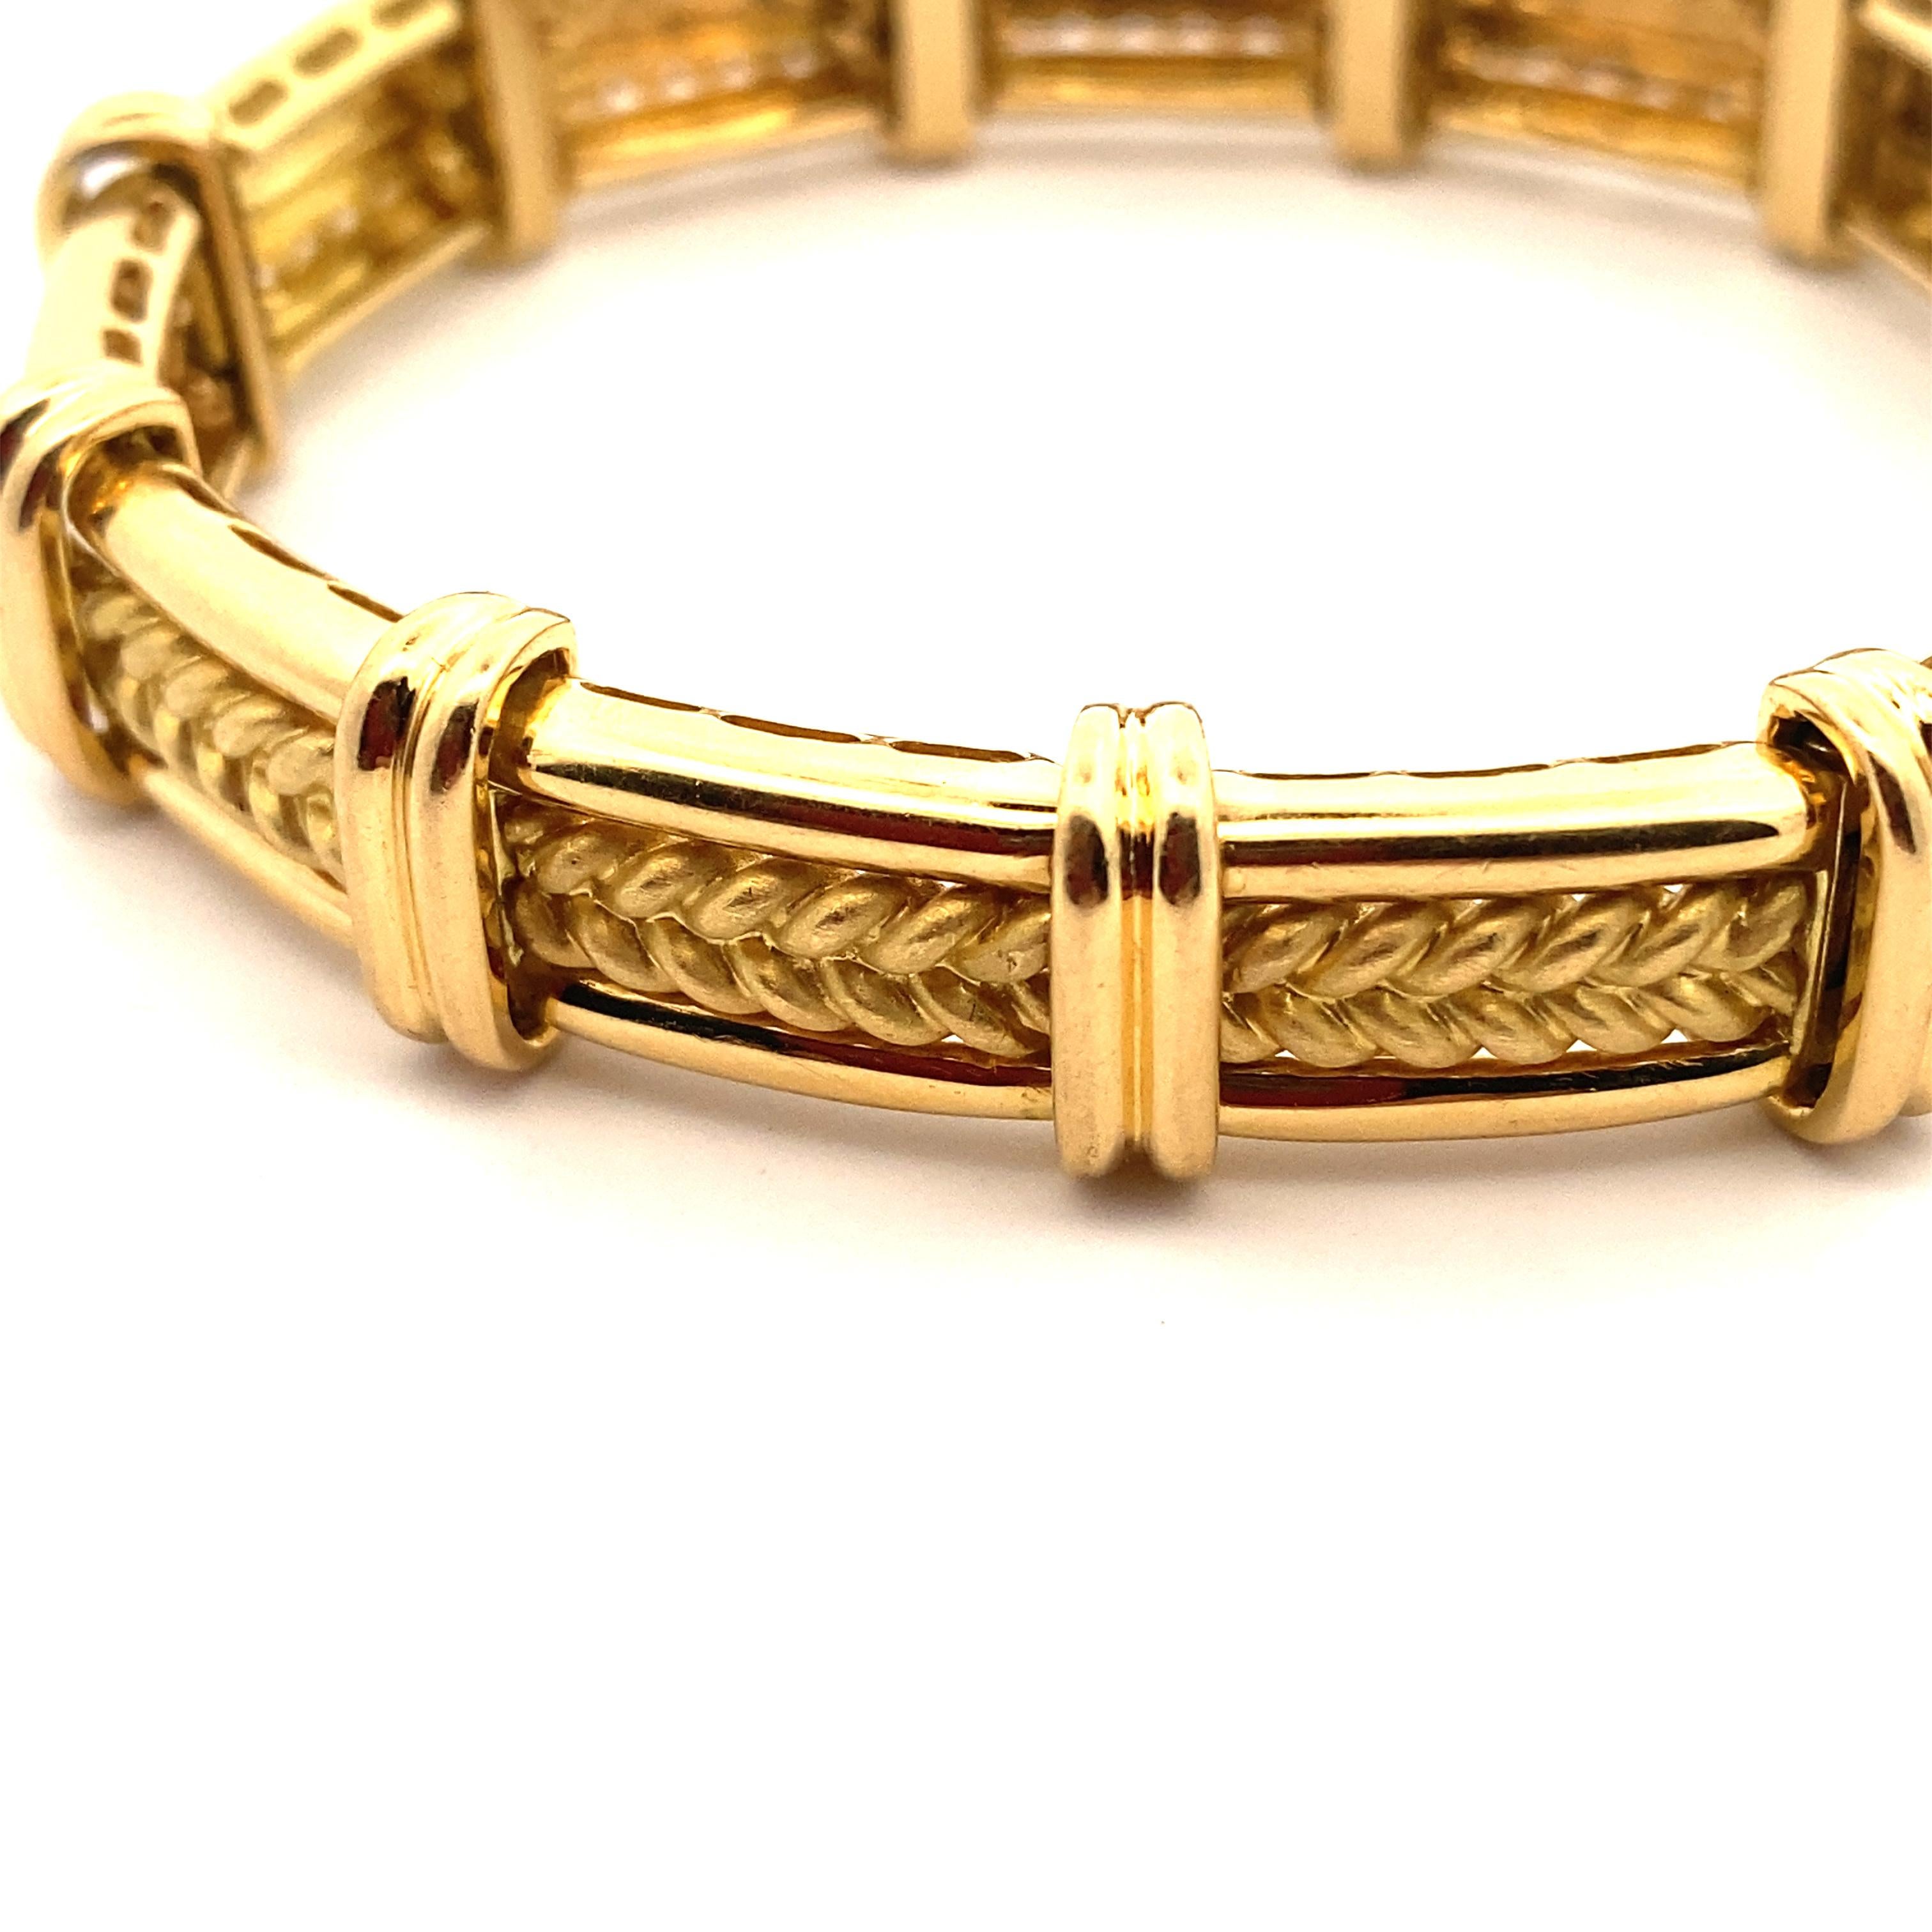 Designed by legendary jewelry designer, Charles Turi, a Hungarian immigrant who served in the U.S. Army. He started designing in 1947 and passed away in 1997.  This isn't just a gold bracelet, it's a TURI gold bracelet!  Crafted of 18k yellow gold,